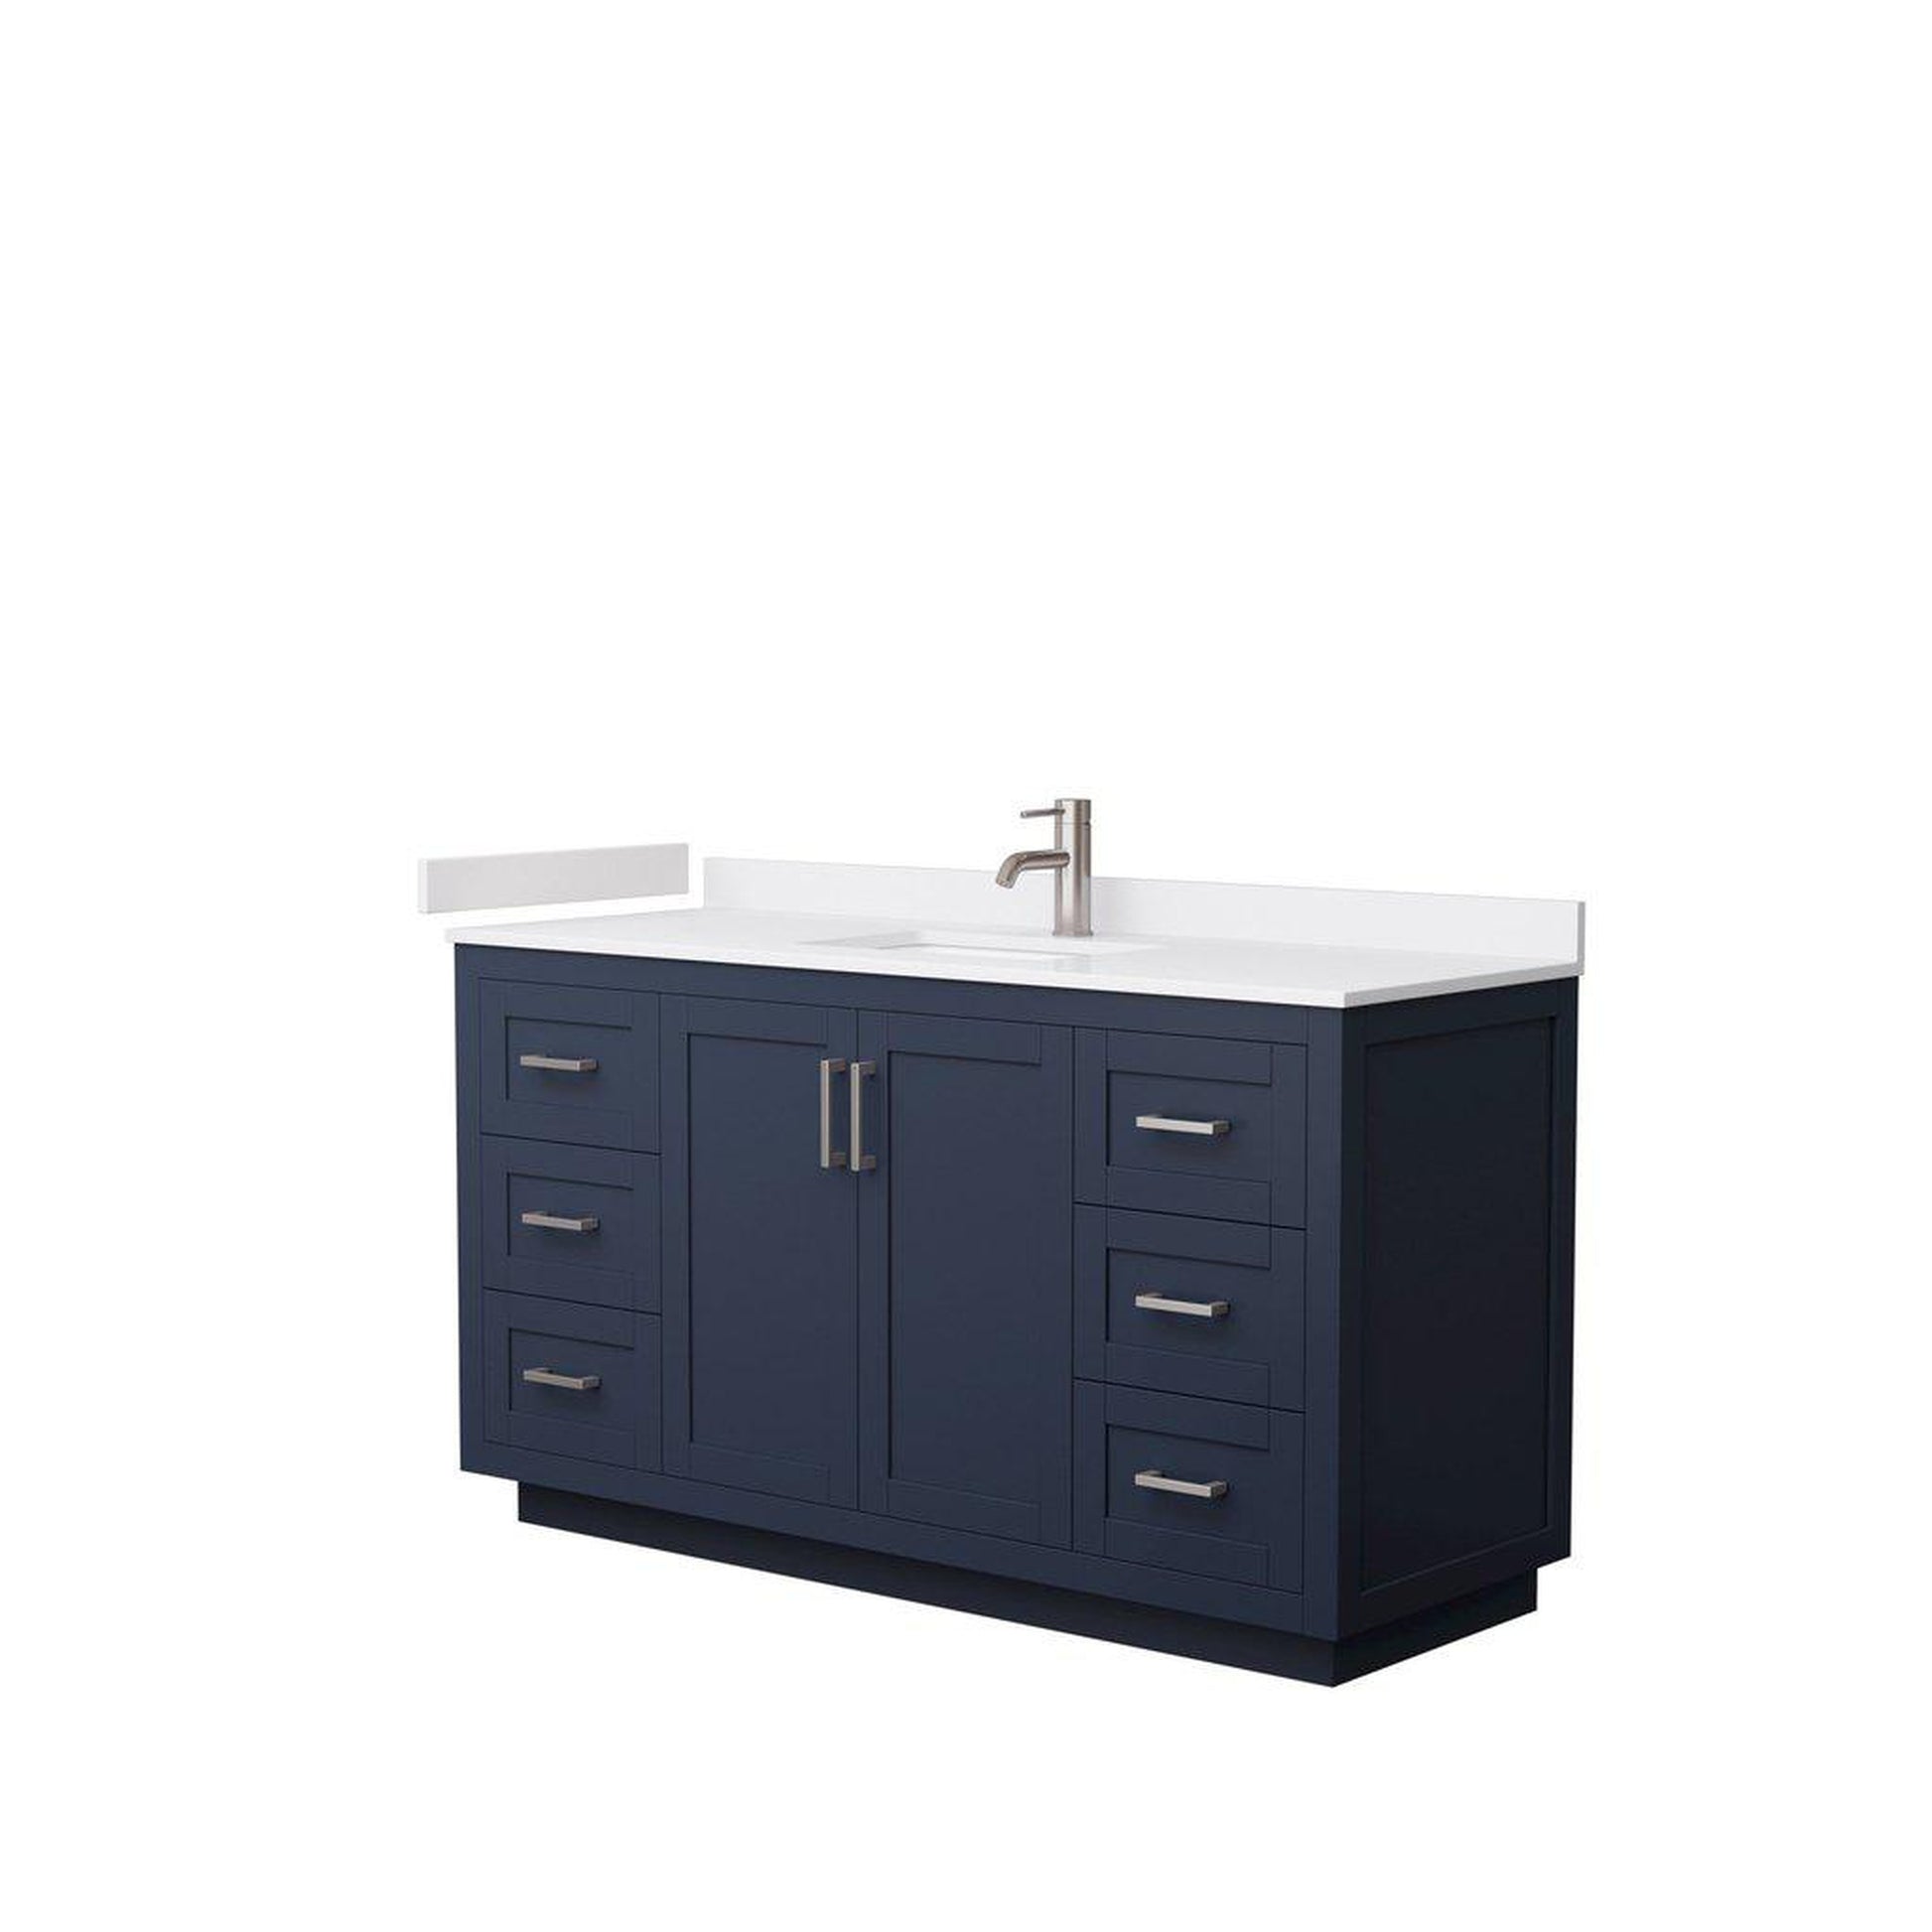 Wyndham Collection Miranda 60" Single Bathroom Dark Blue Vanity Set With White Cultured Marble Countertop, Undermount Square Sink, And Brushed Nickel Trim